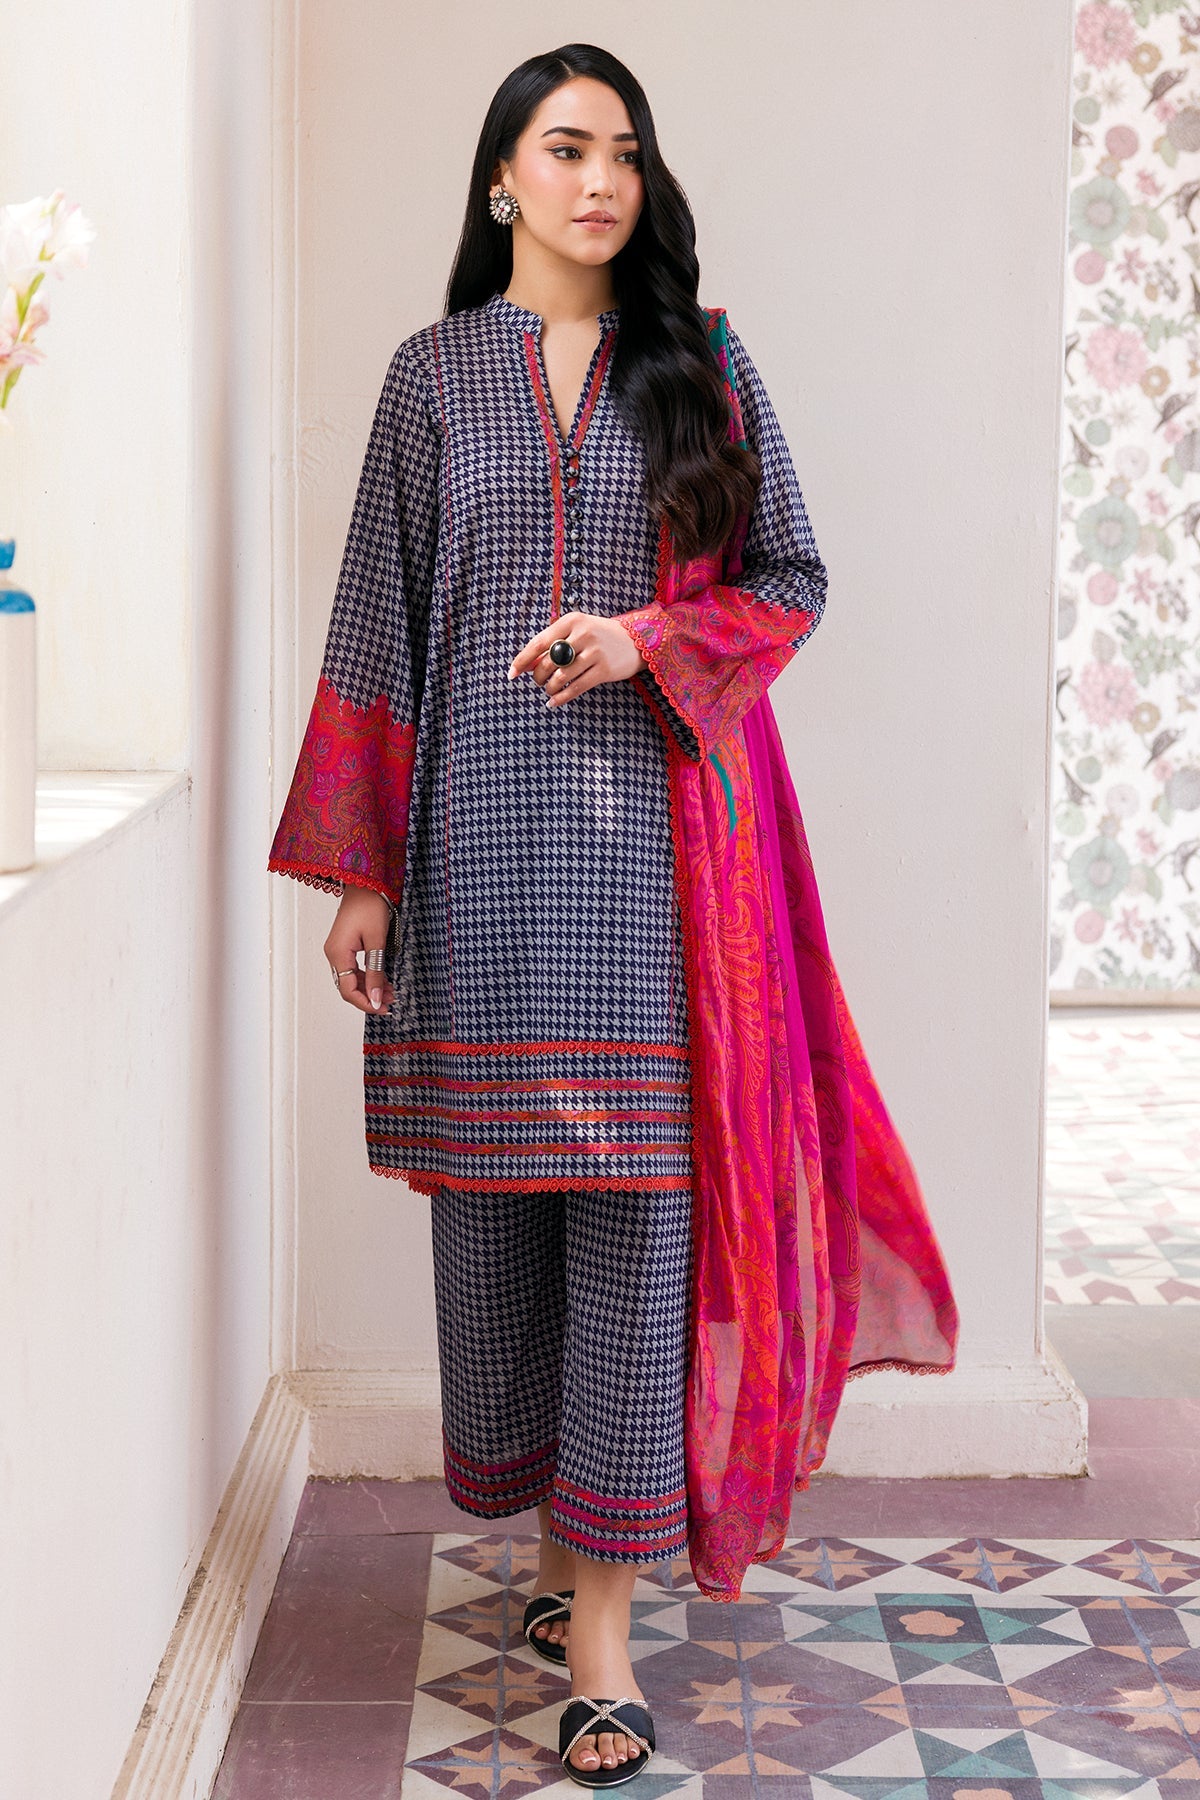 3-PC Printed Lawn Shirt with Trouser and Chiffon Dupatta CPM-4-07